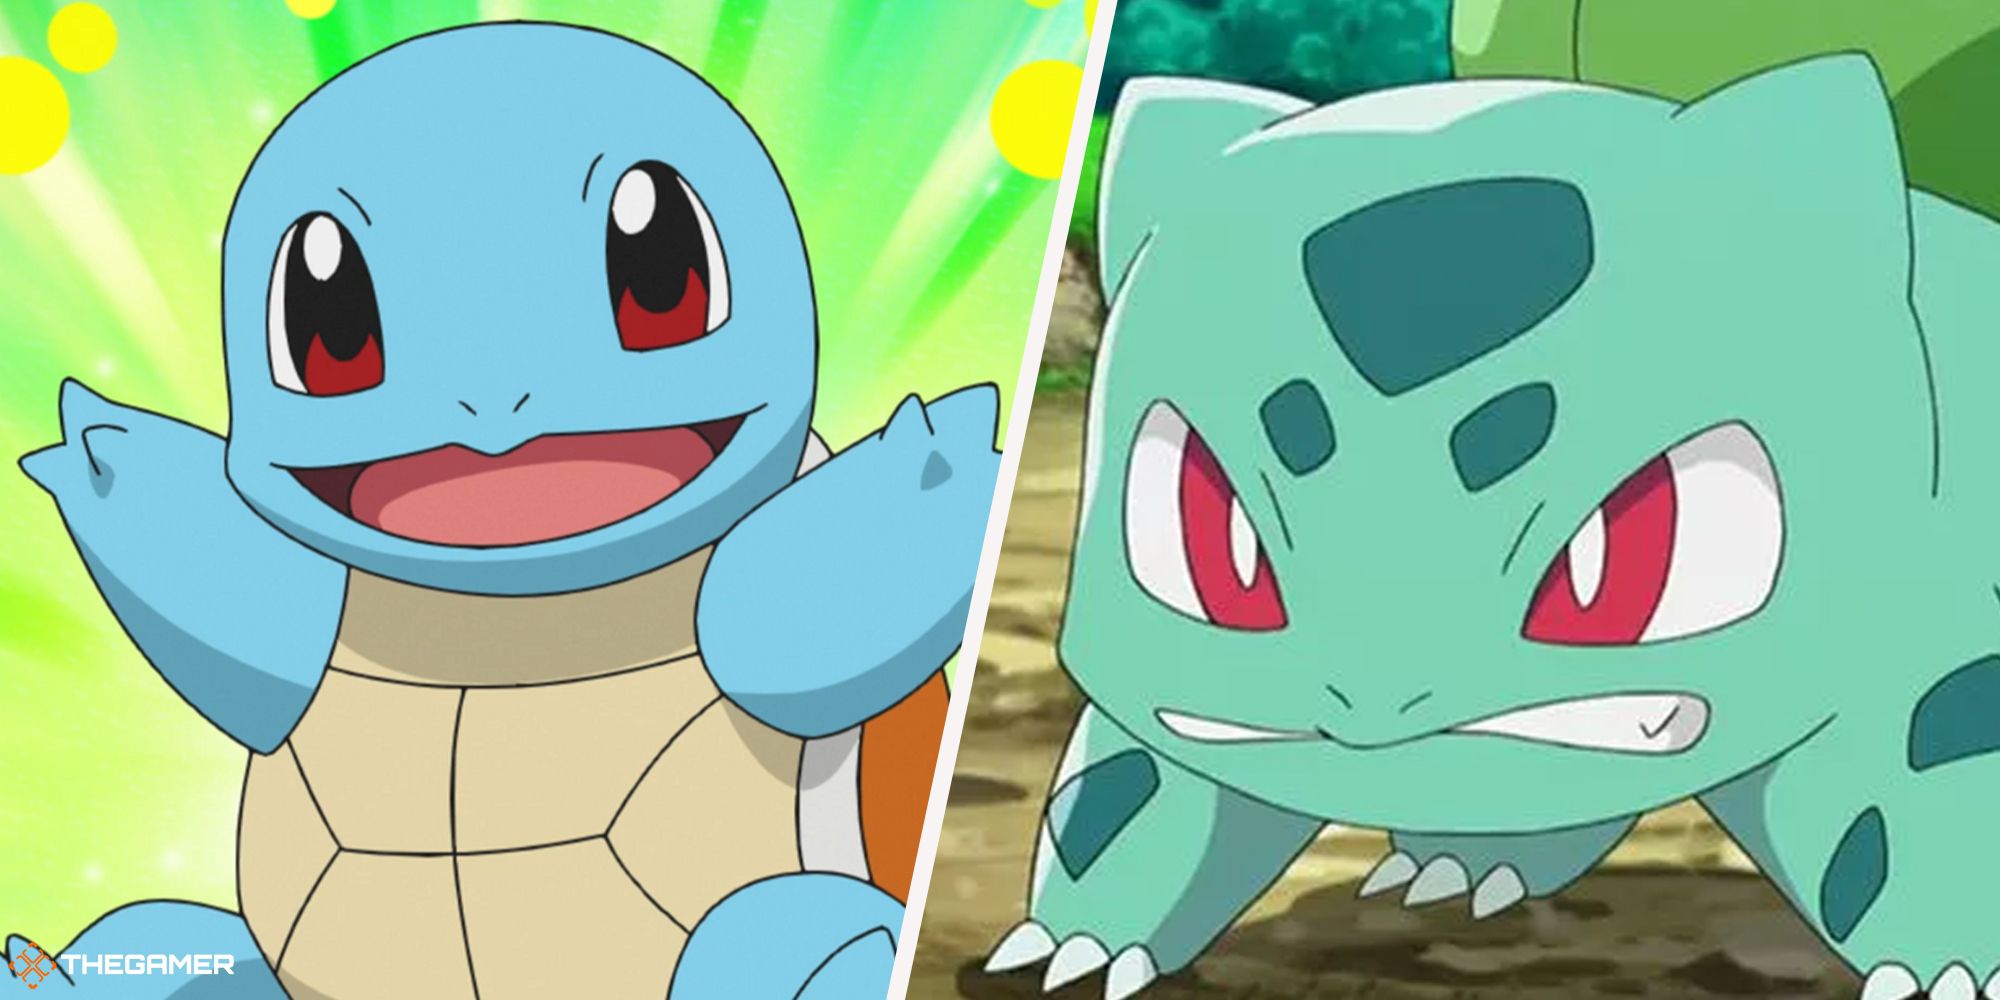 Pokemon - Bulbasaur and Squirtle